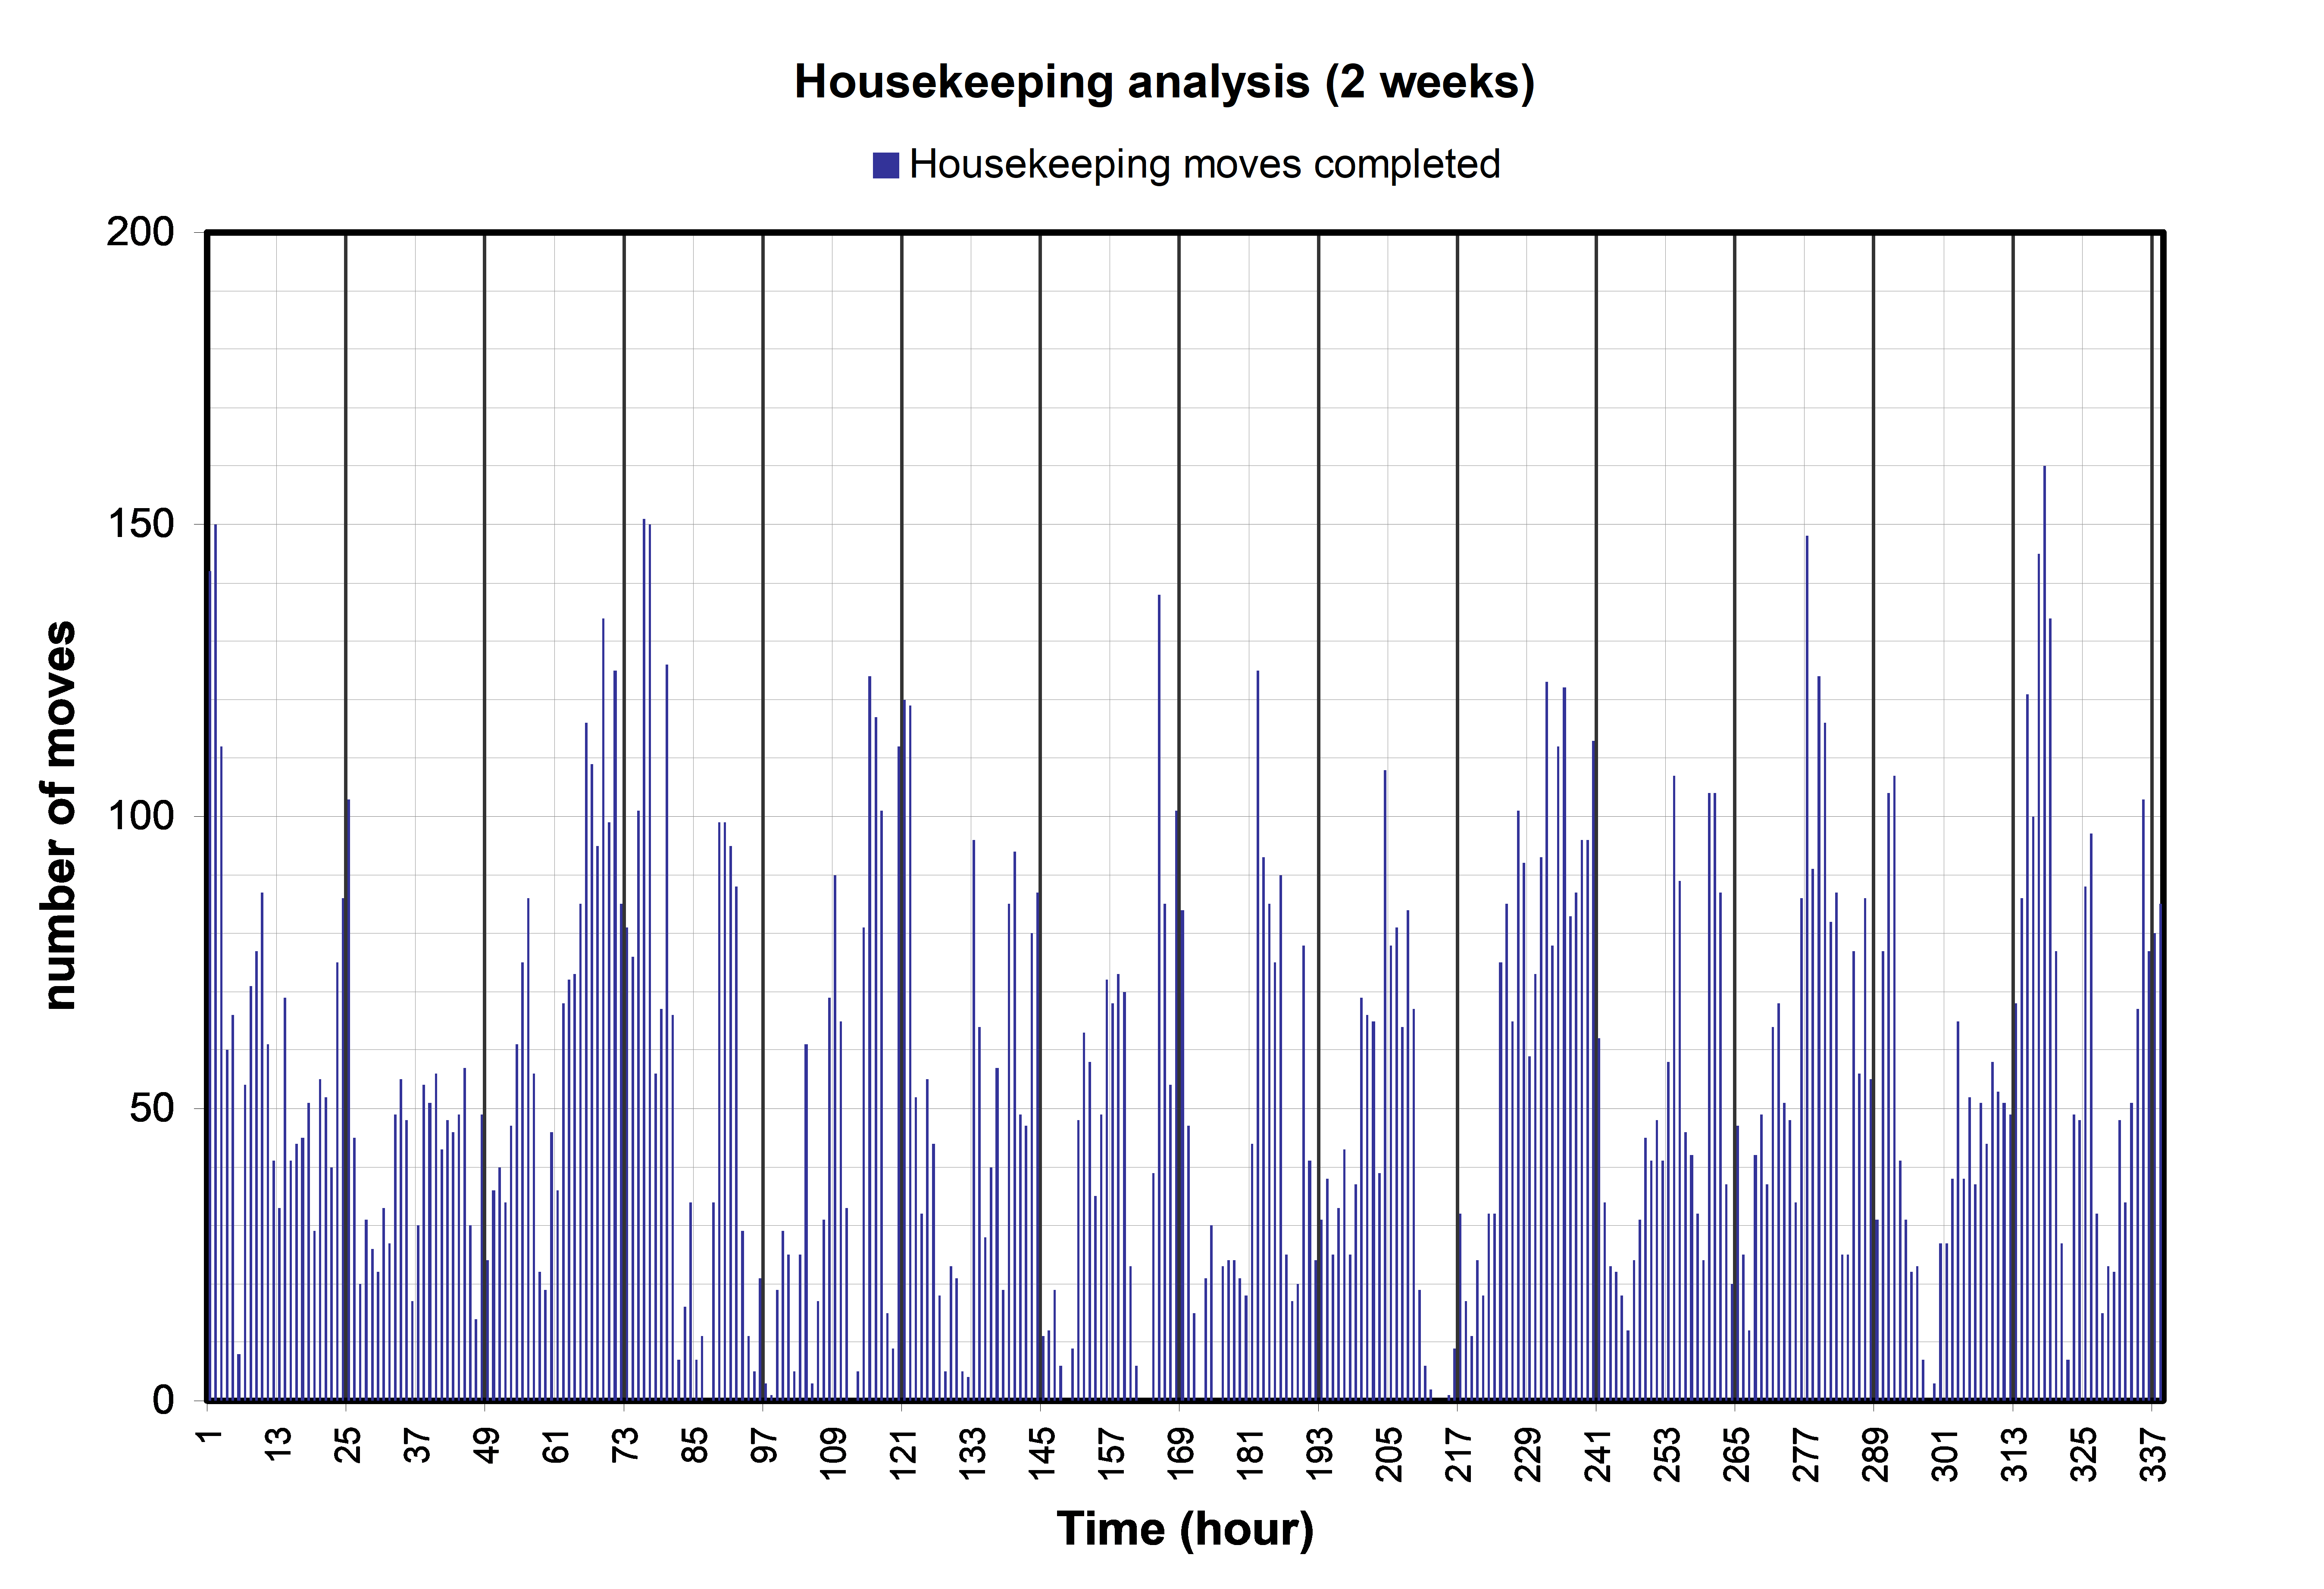 Number of housekeeping moves performed in traditional strategy